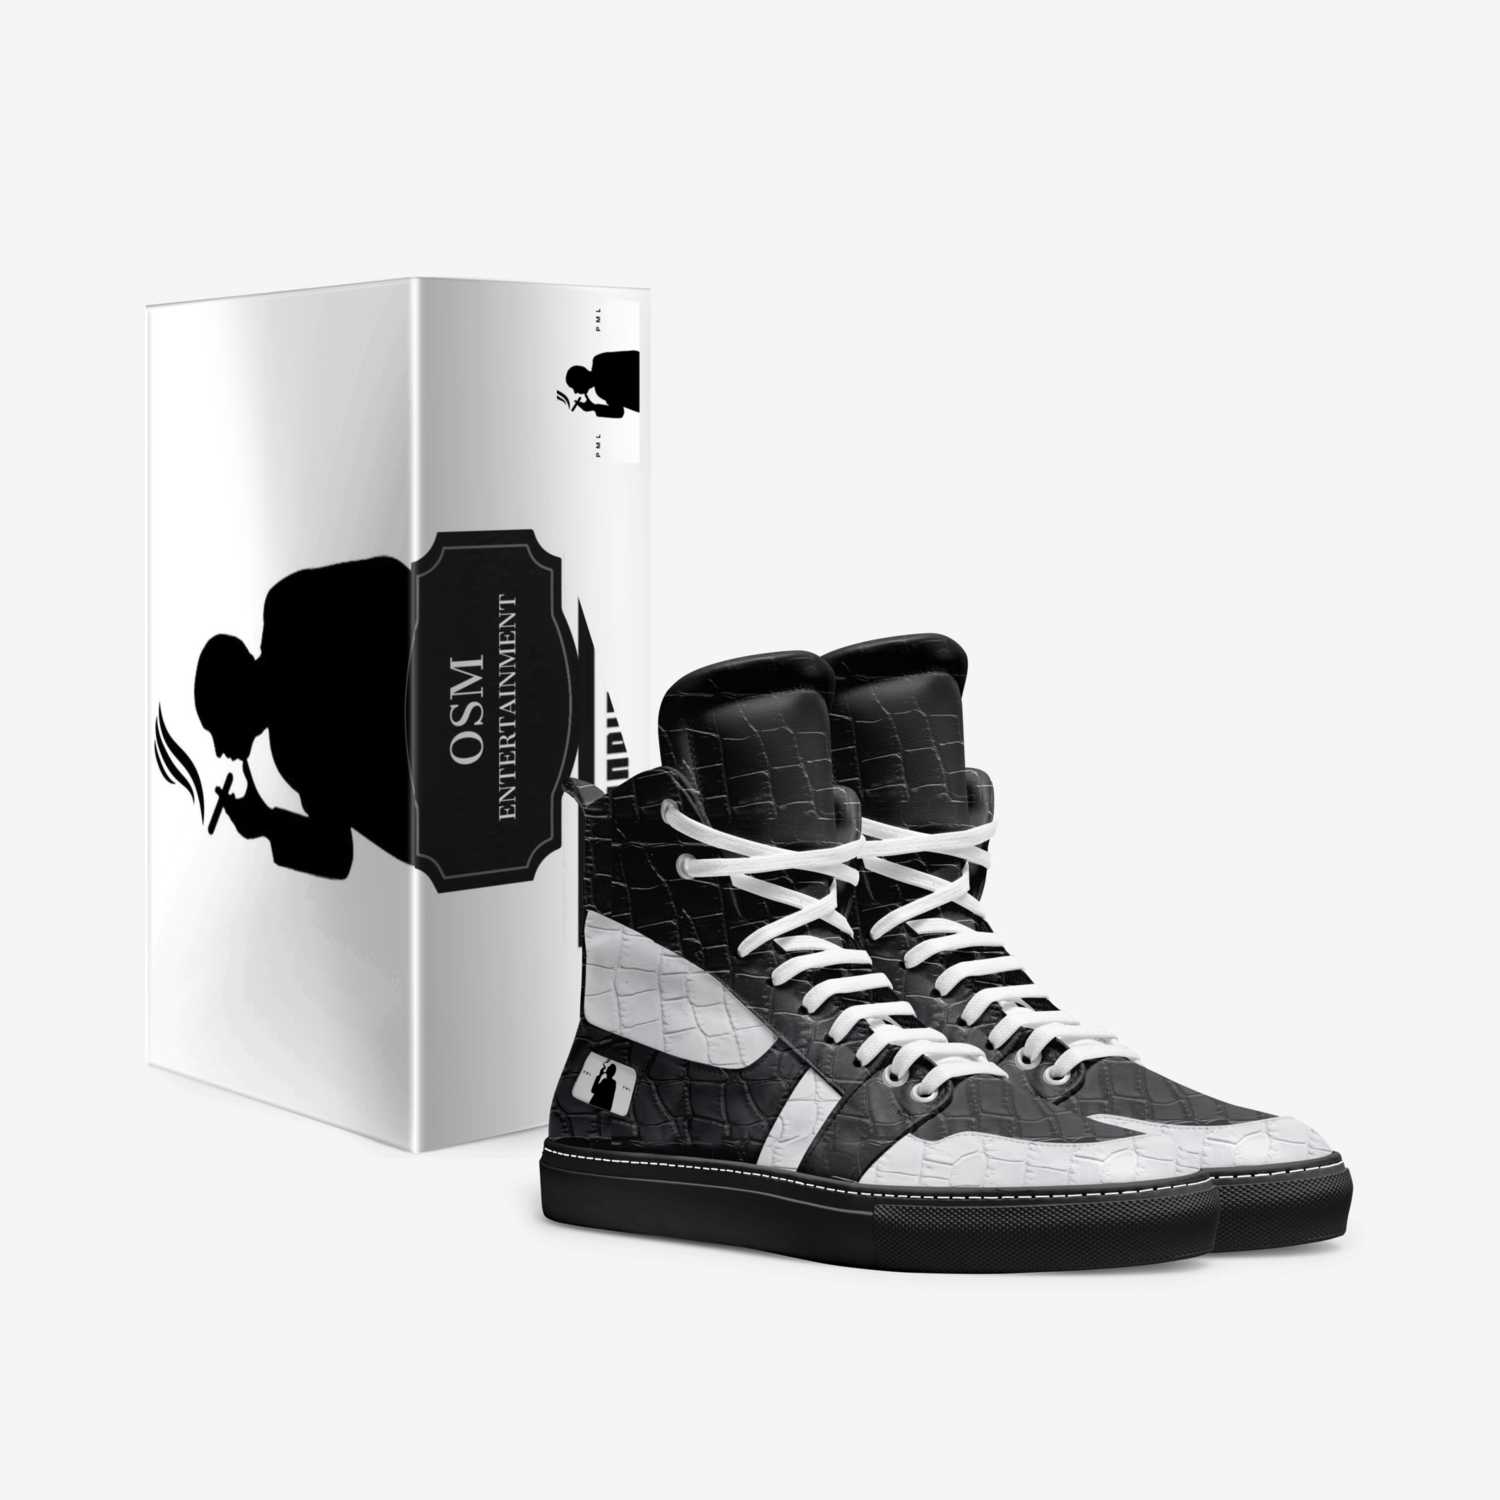 OSM BLACK & WHITE custom made in Italy shoes by Ahad Bey | Box view